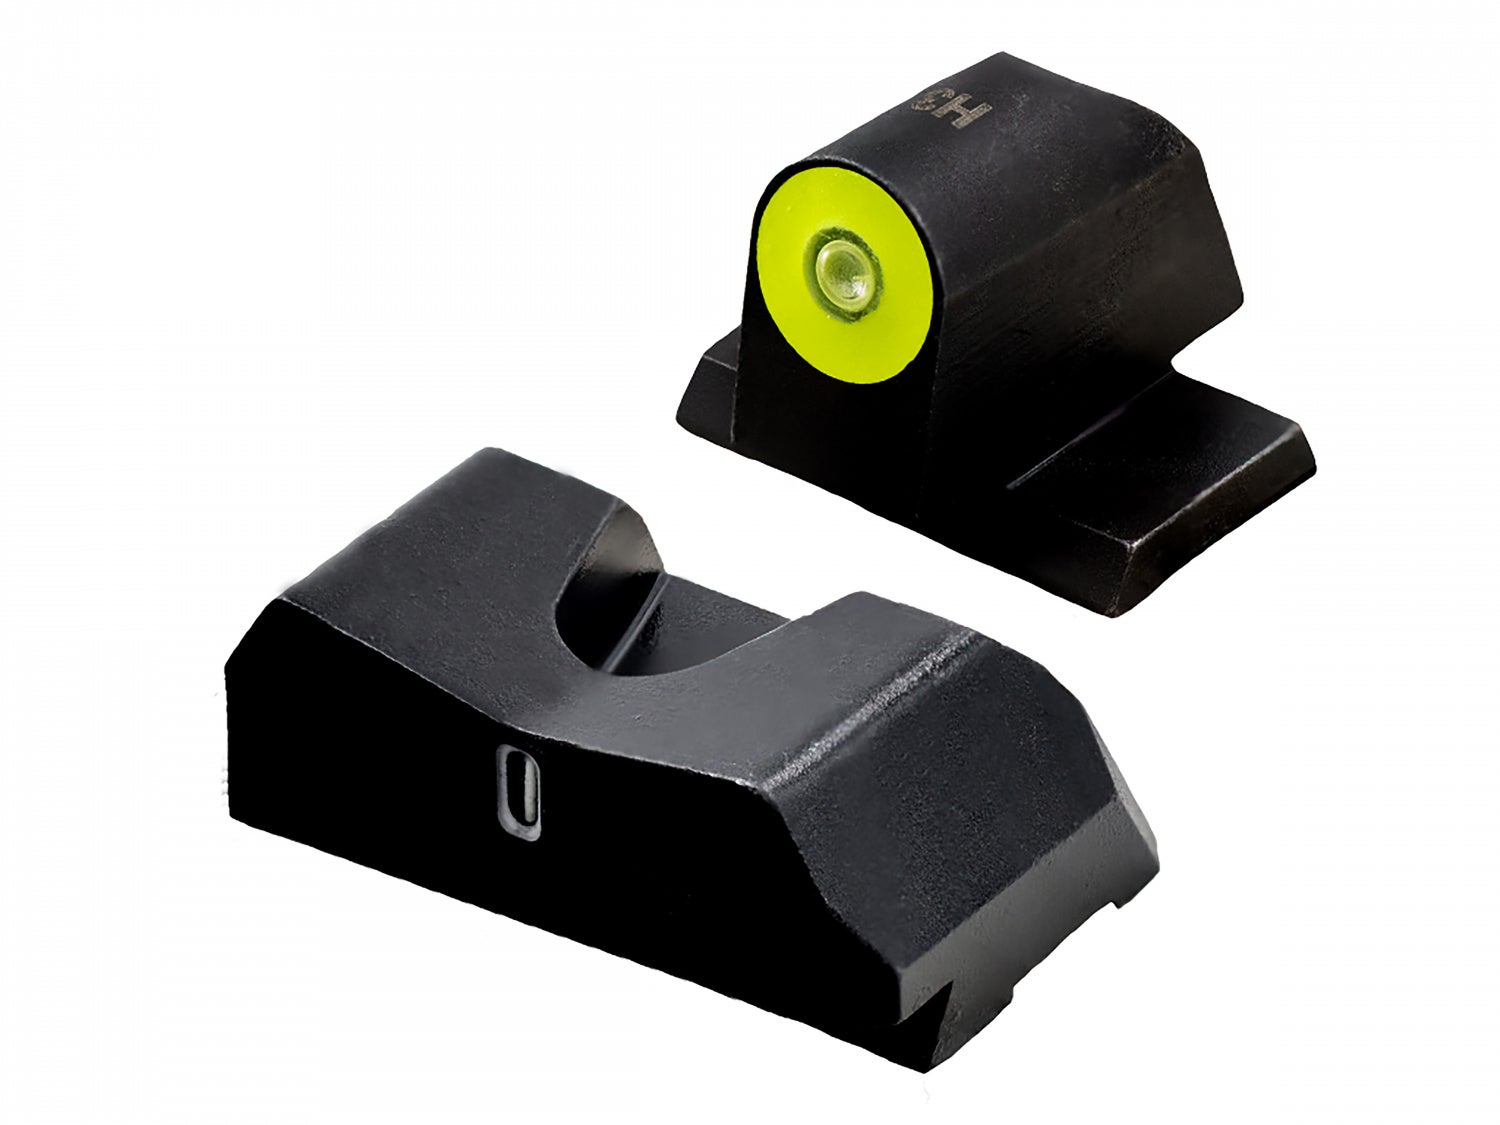 New Night Sights for the S&W CSX and M&P M2.0 OR Pistols from XS